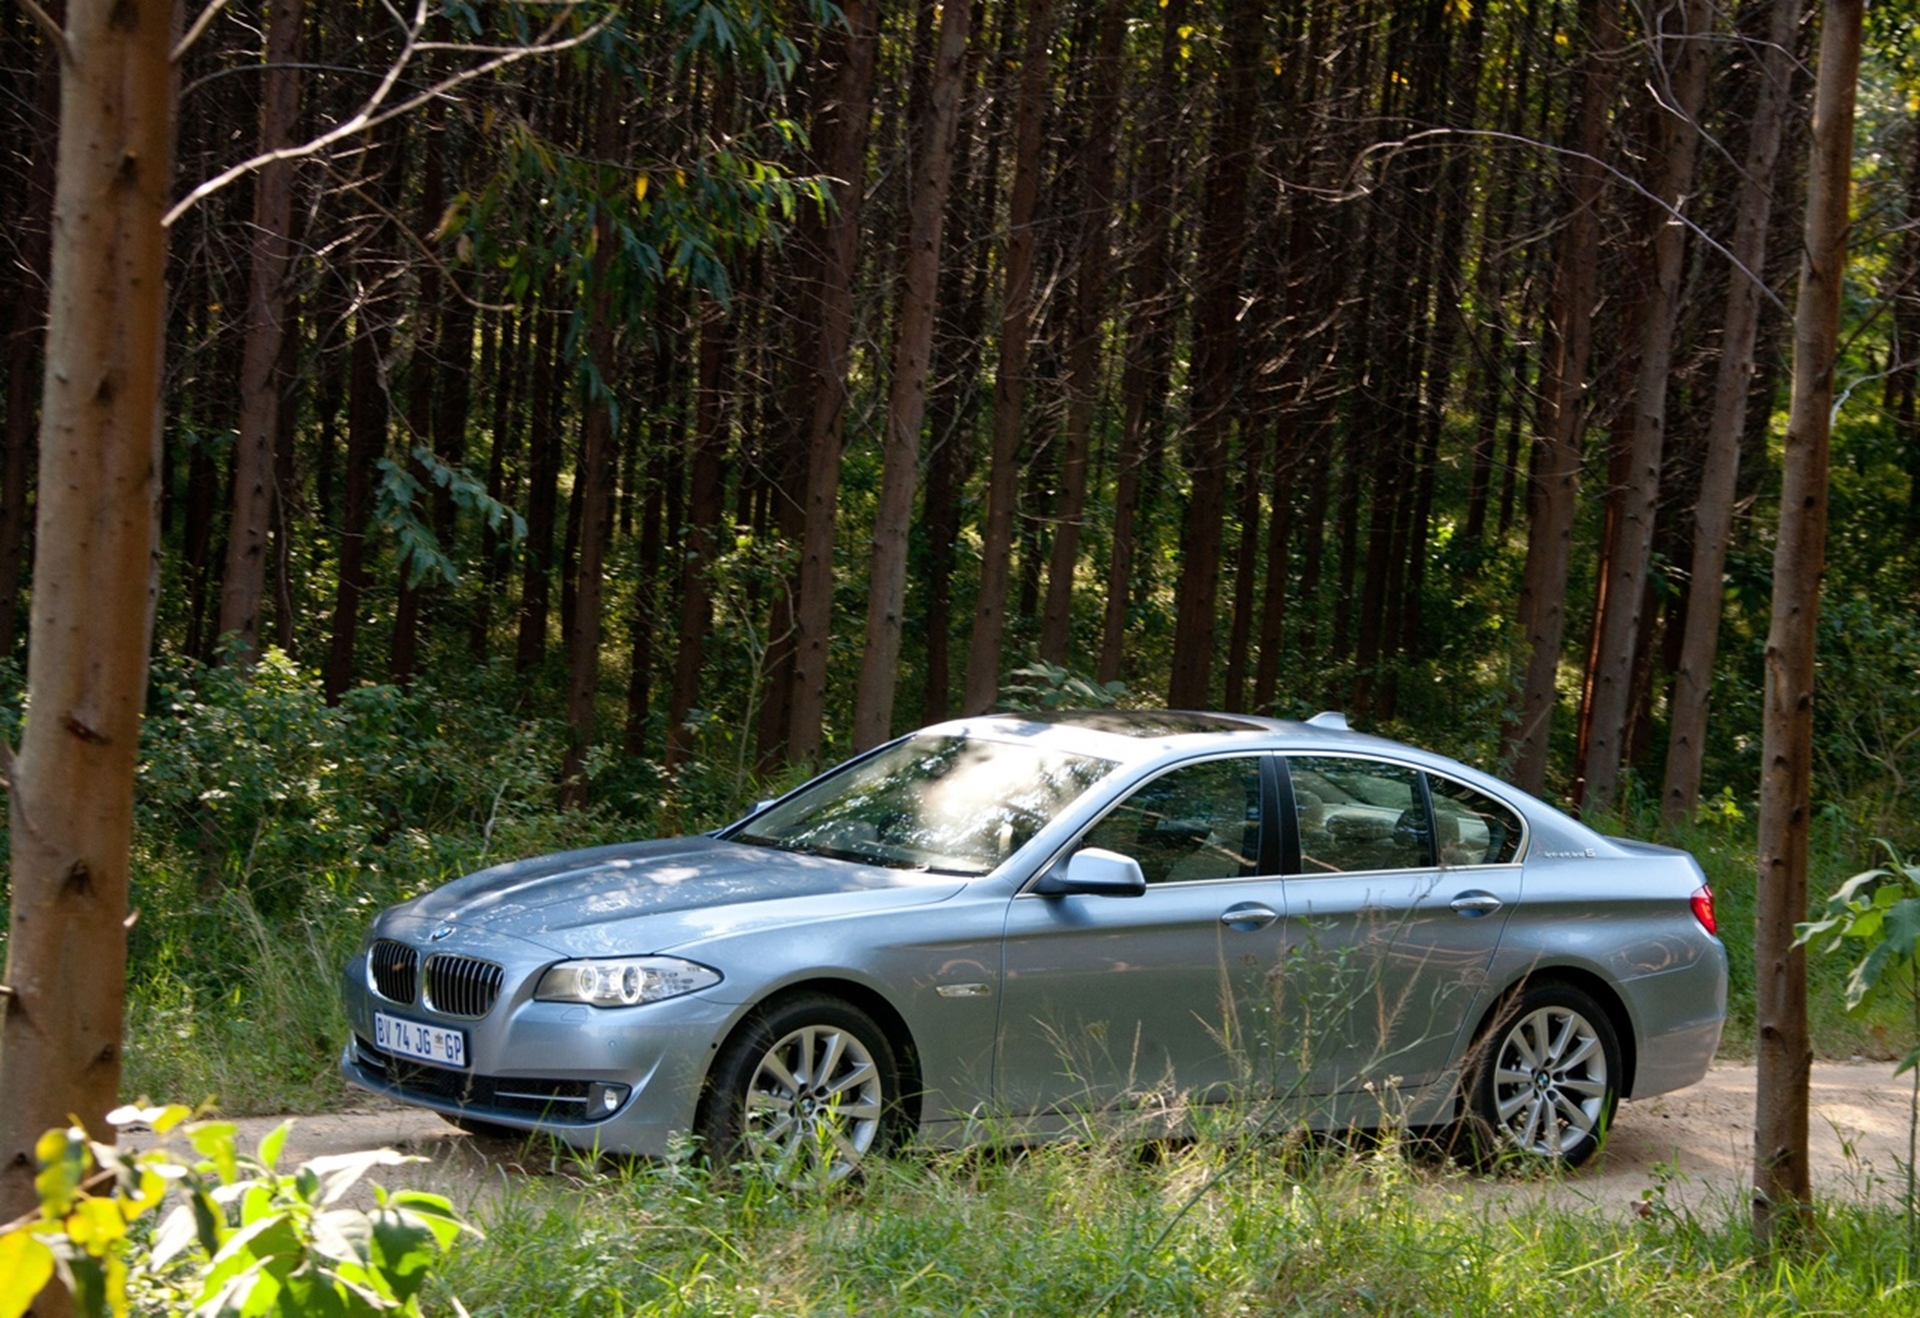 BMW Group again named most sustainable automotive company